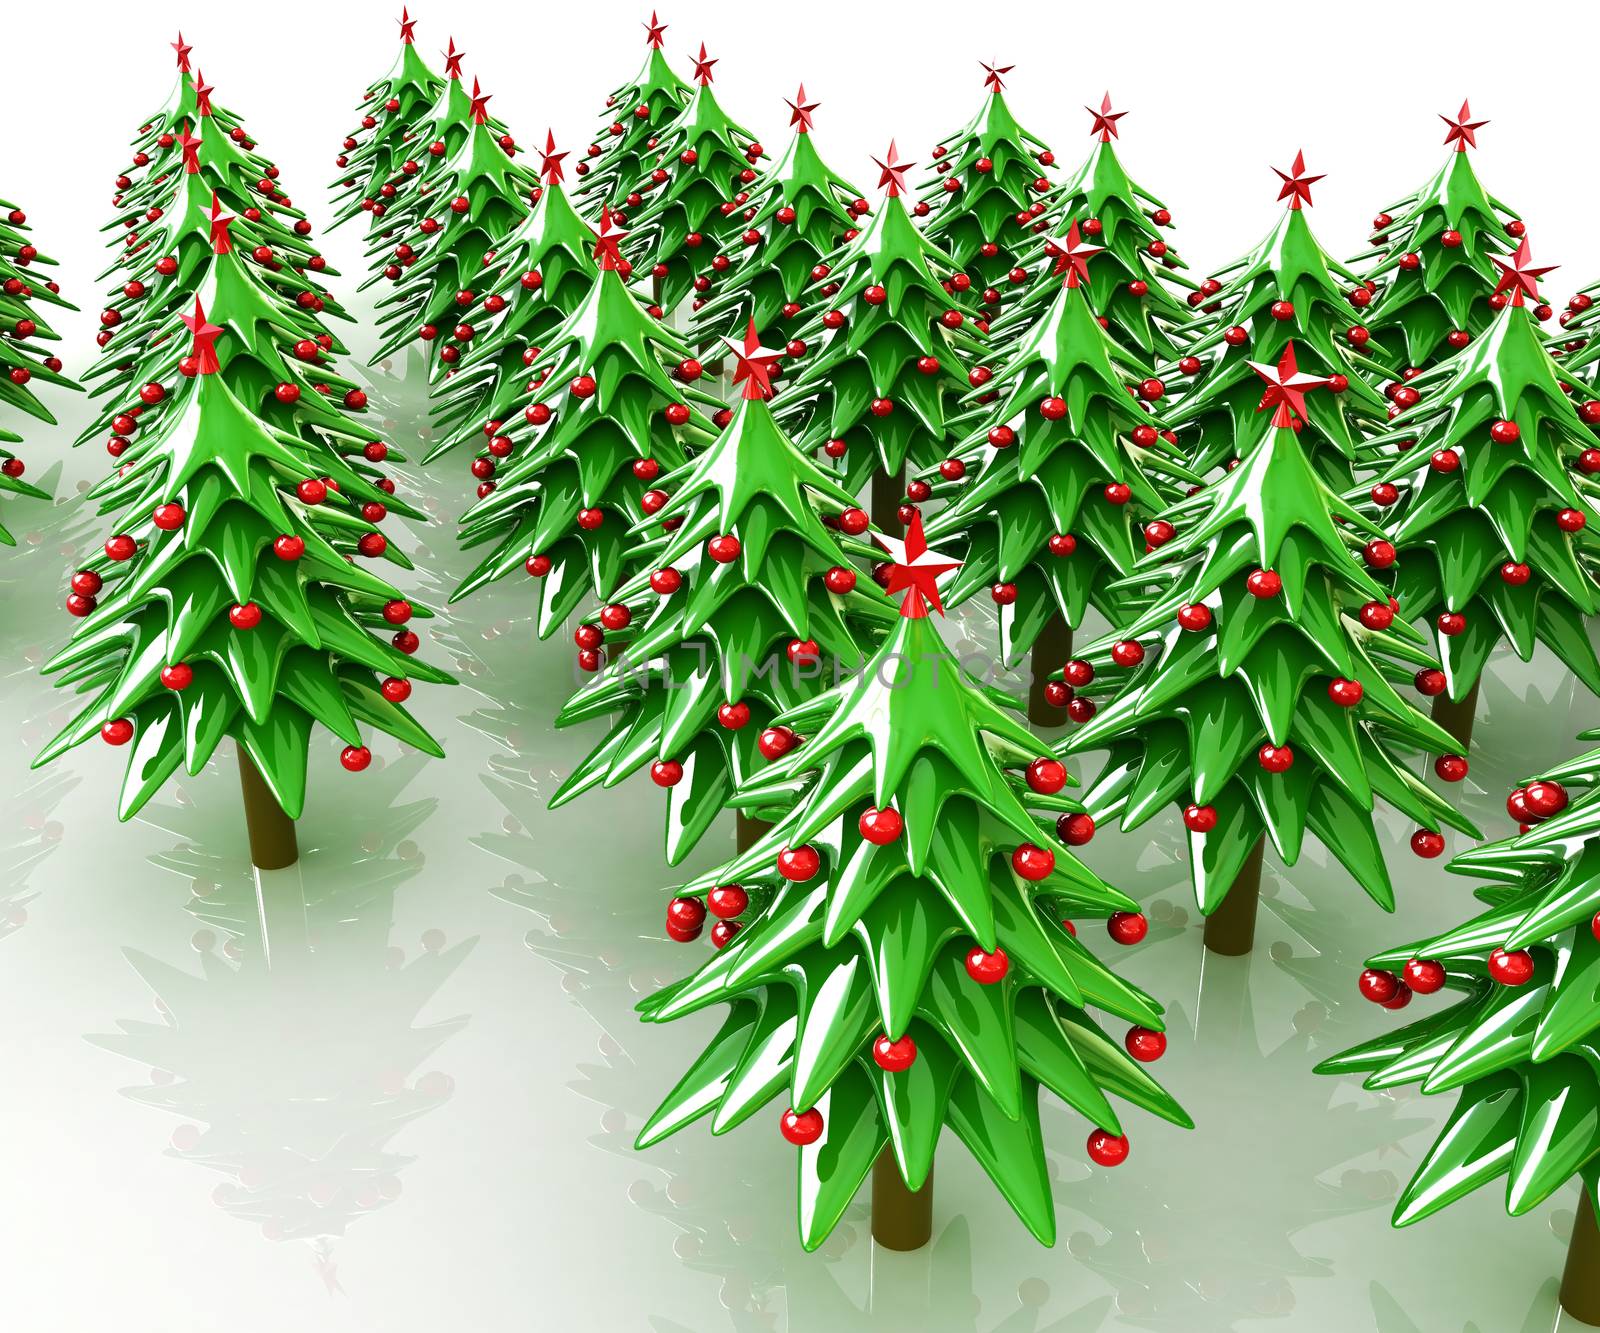 Christmas trees on a white background 